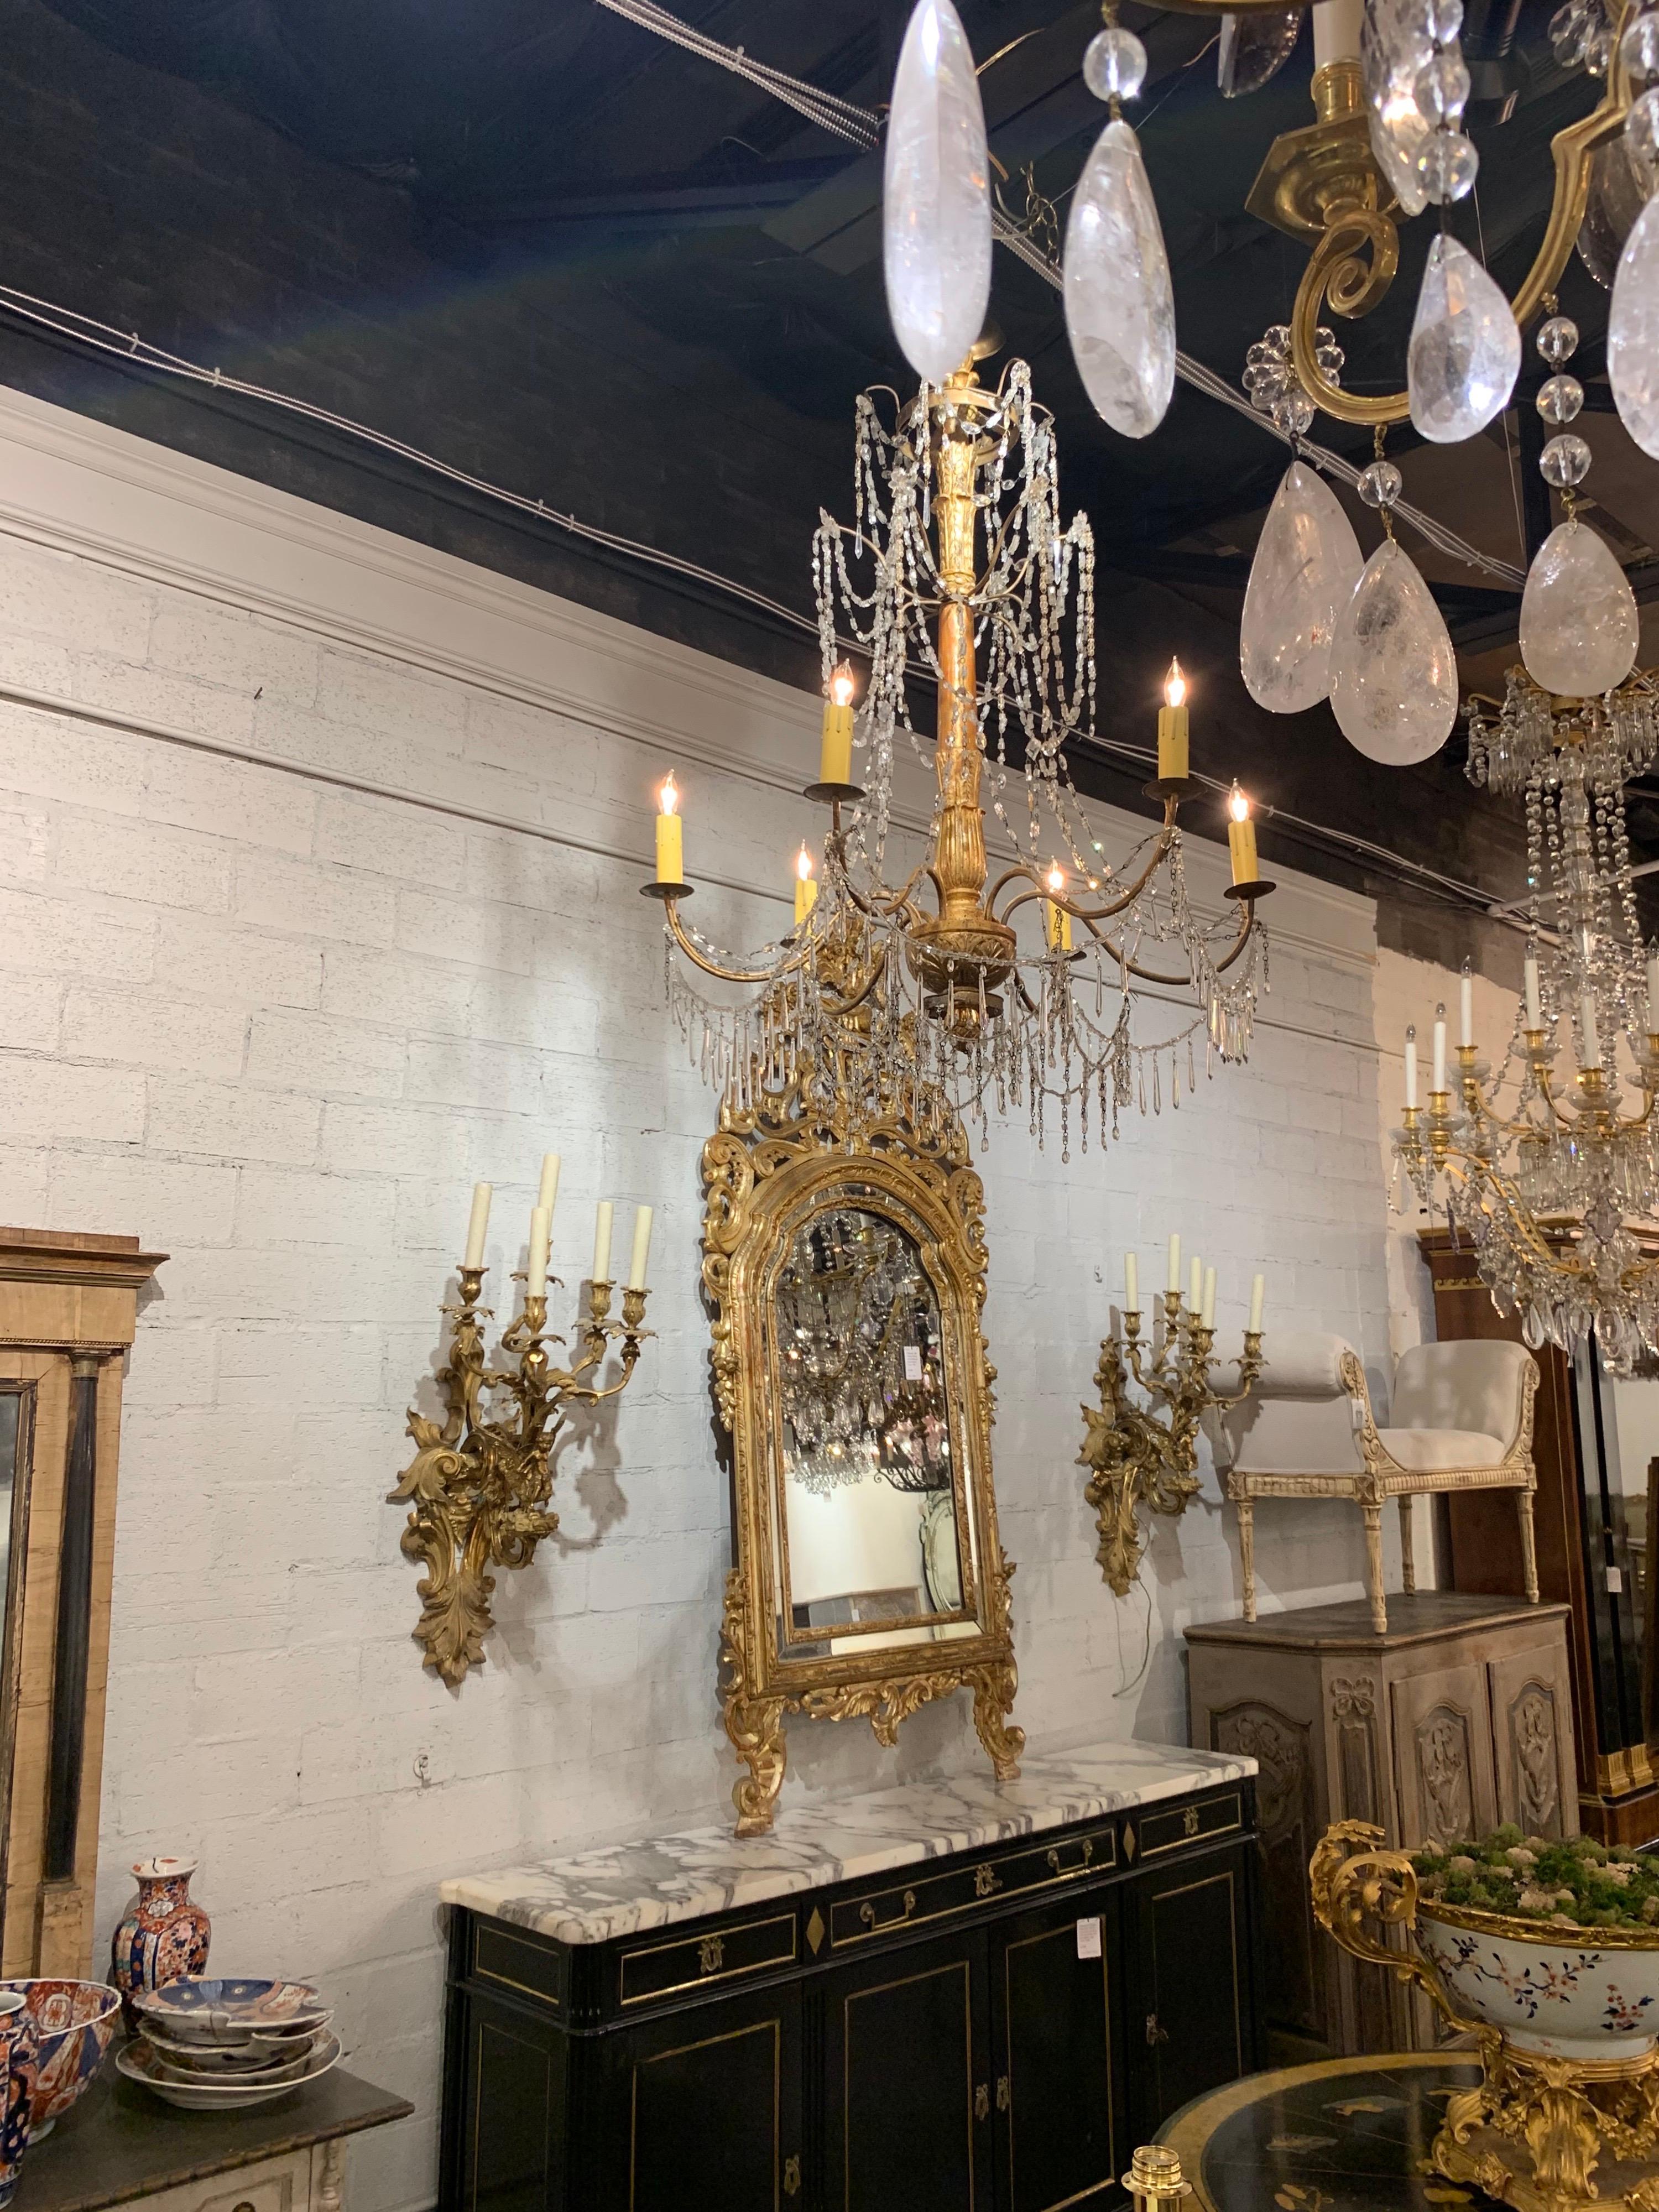 Very fine 18th century Italian giltwood beaded chandelier with 6 lights from Genoa. Pretty scale and shape on this fixture. A lovely addition to a fine home!